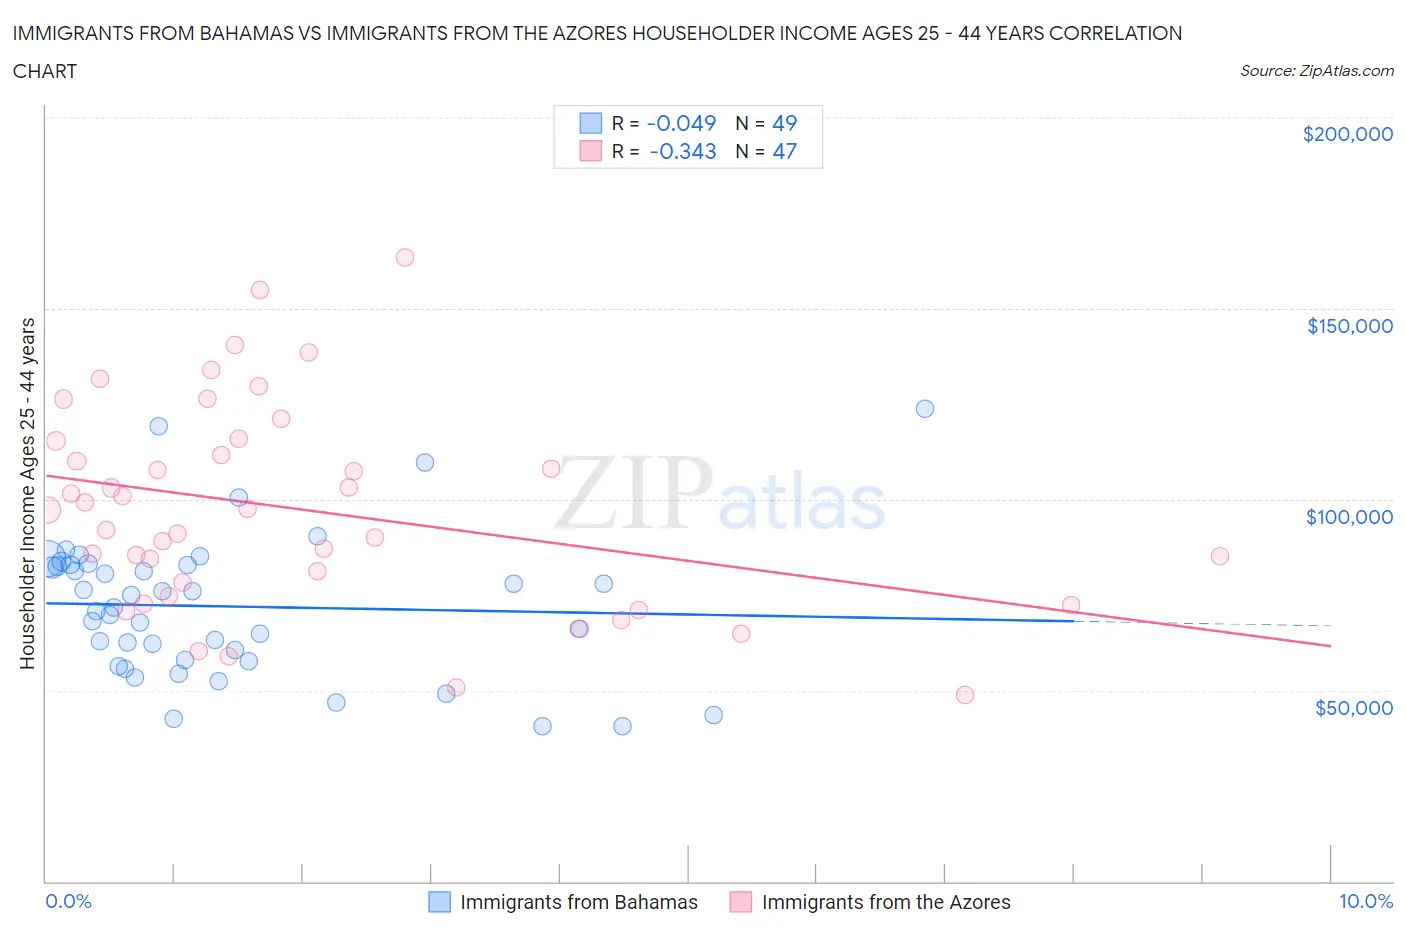 Immigrants from Bahamas vs Immigrants from the Azores Householder Income Ages 25 - 44 years